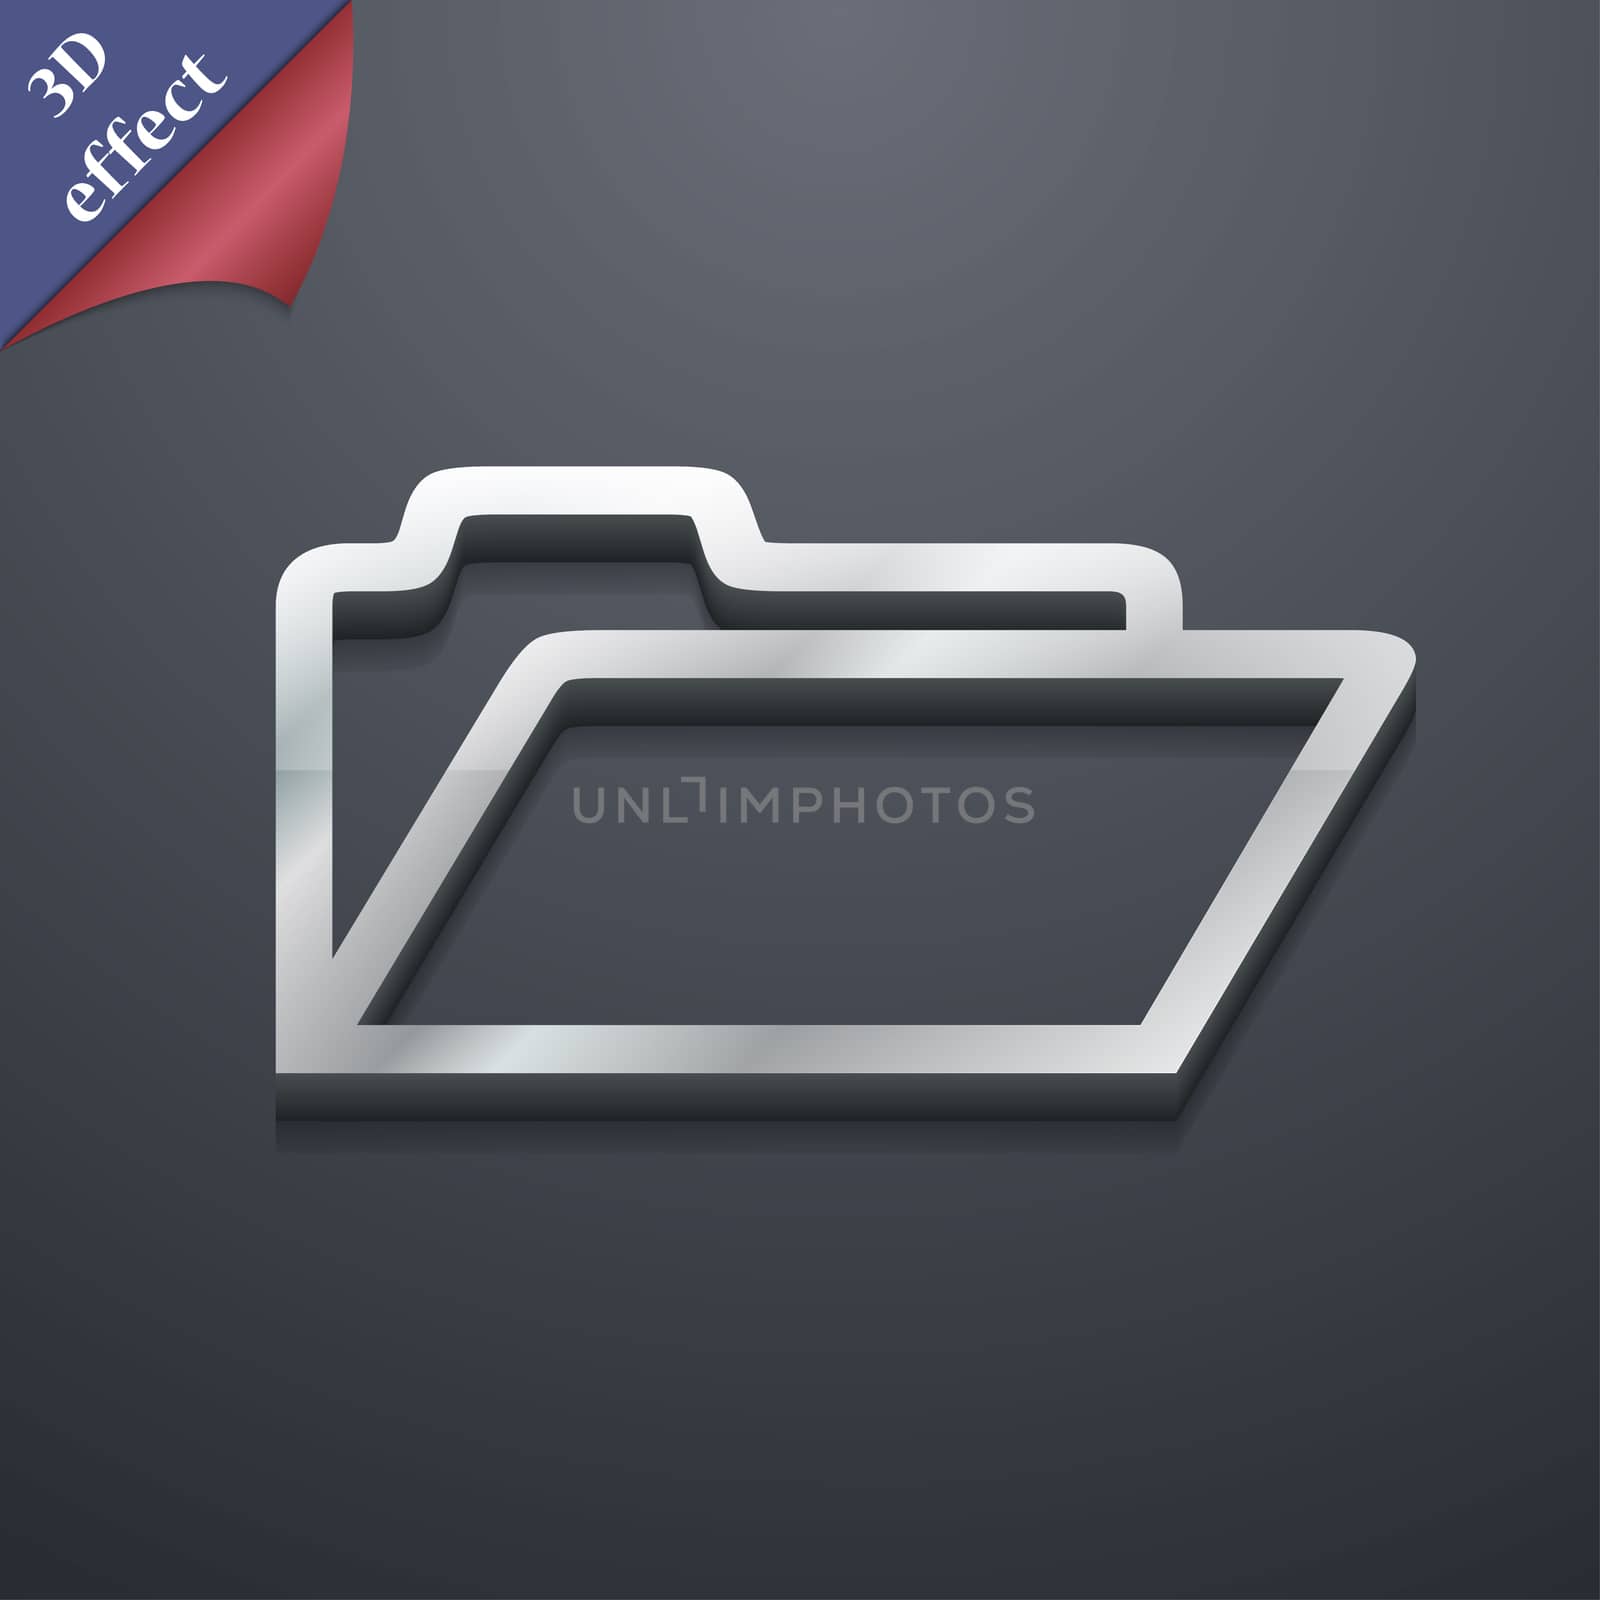 Folder icon symbol. 3D style. Trendy, modern design with space for your text illustration. Rastrized copy